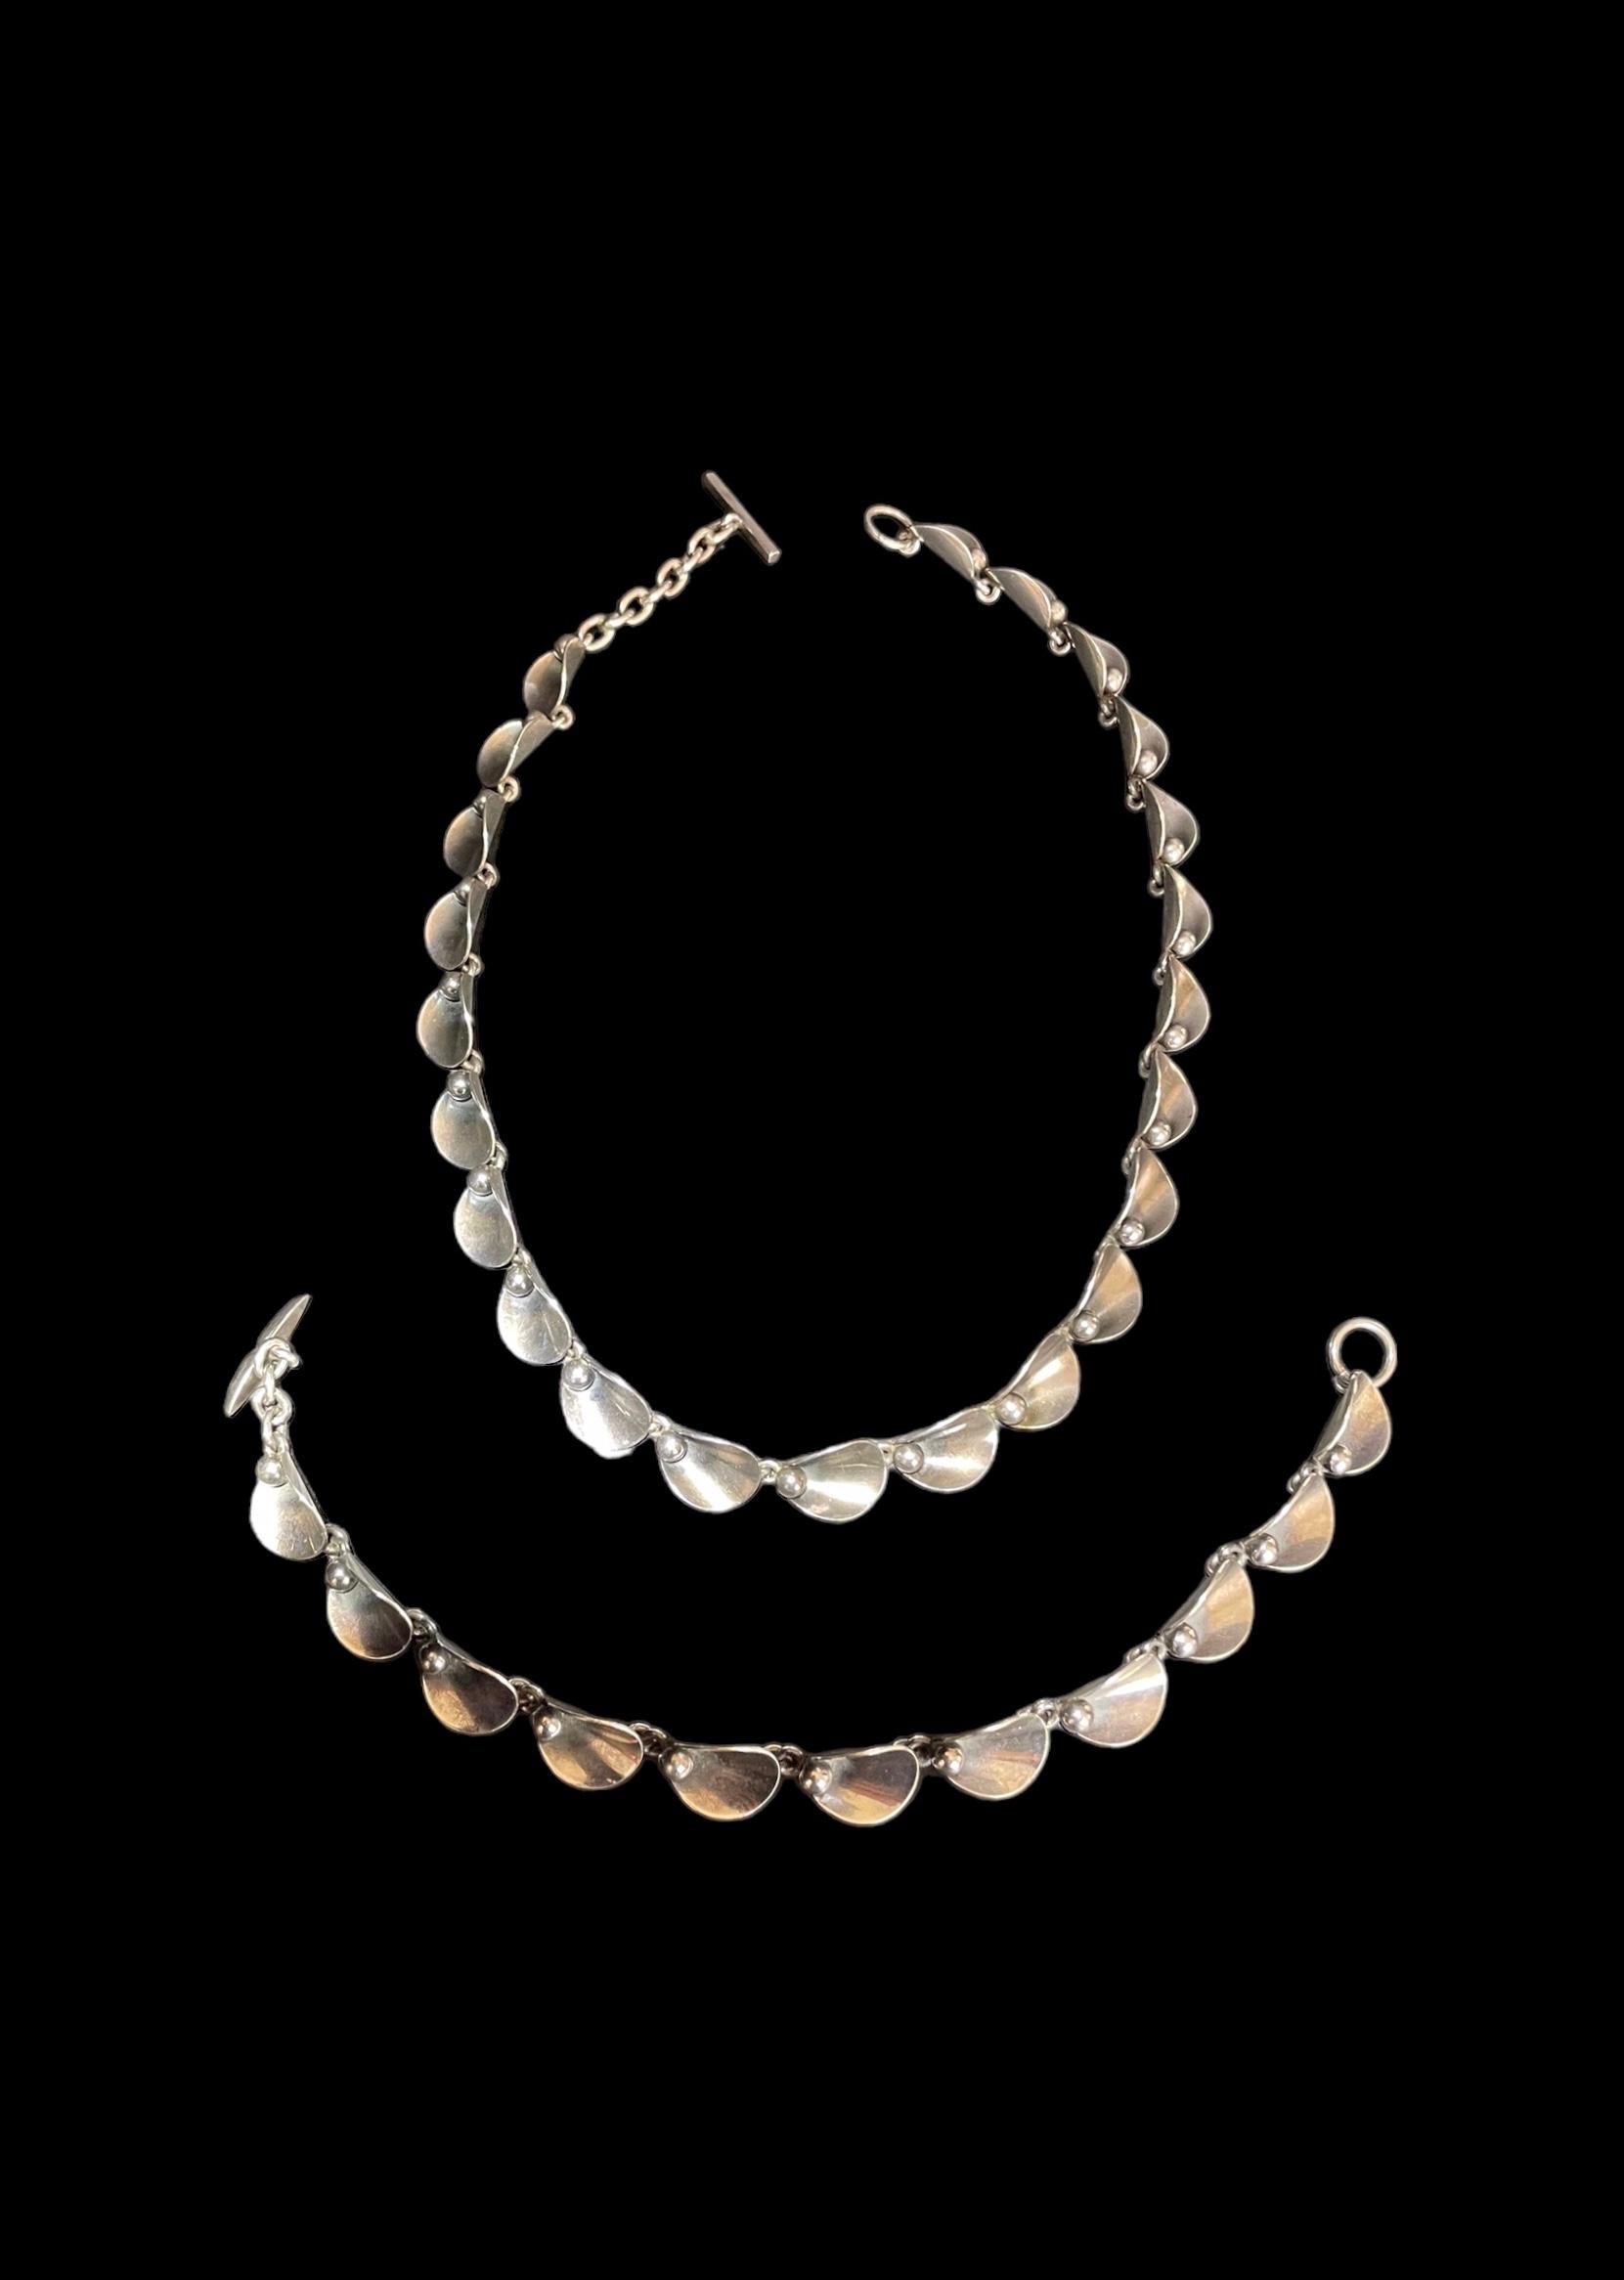 Organic Modern Silver Necklace And Bracelet By Niels Erik From For Sale